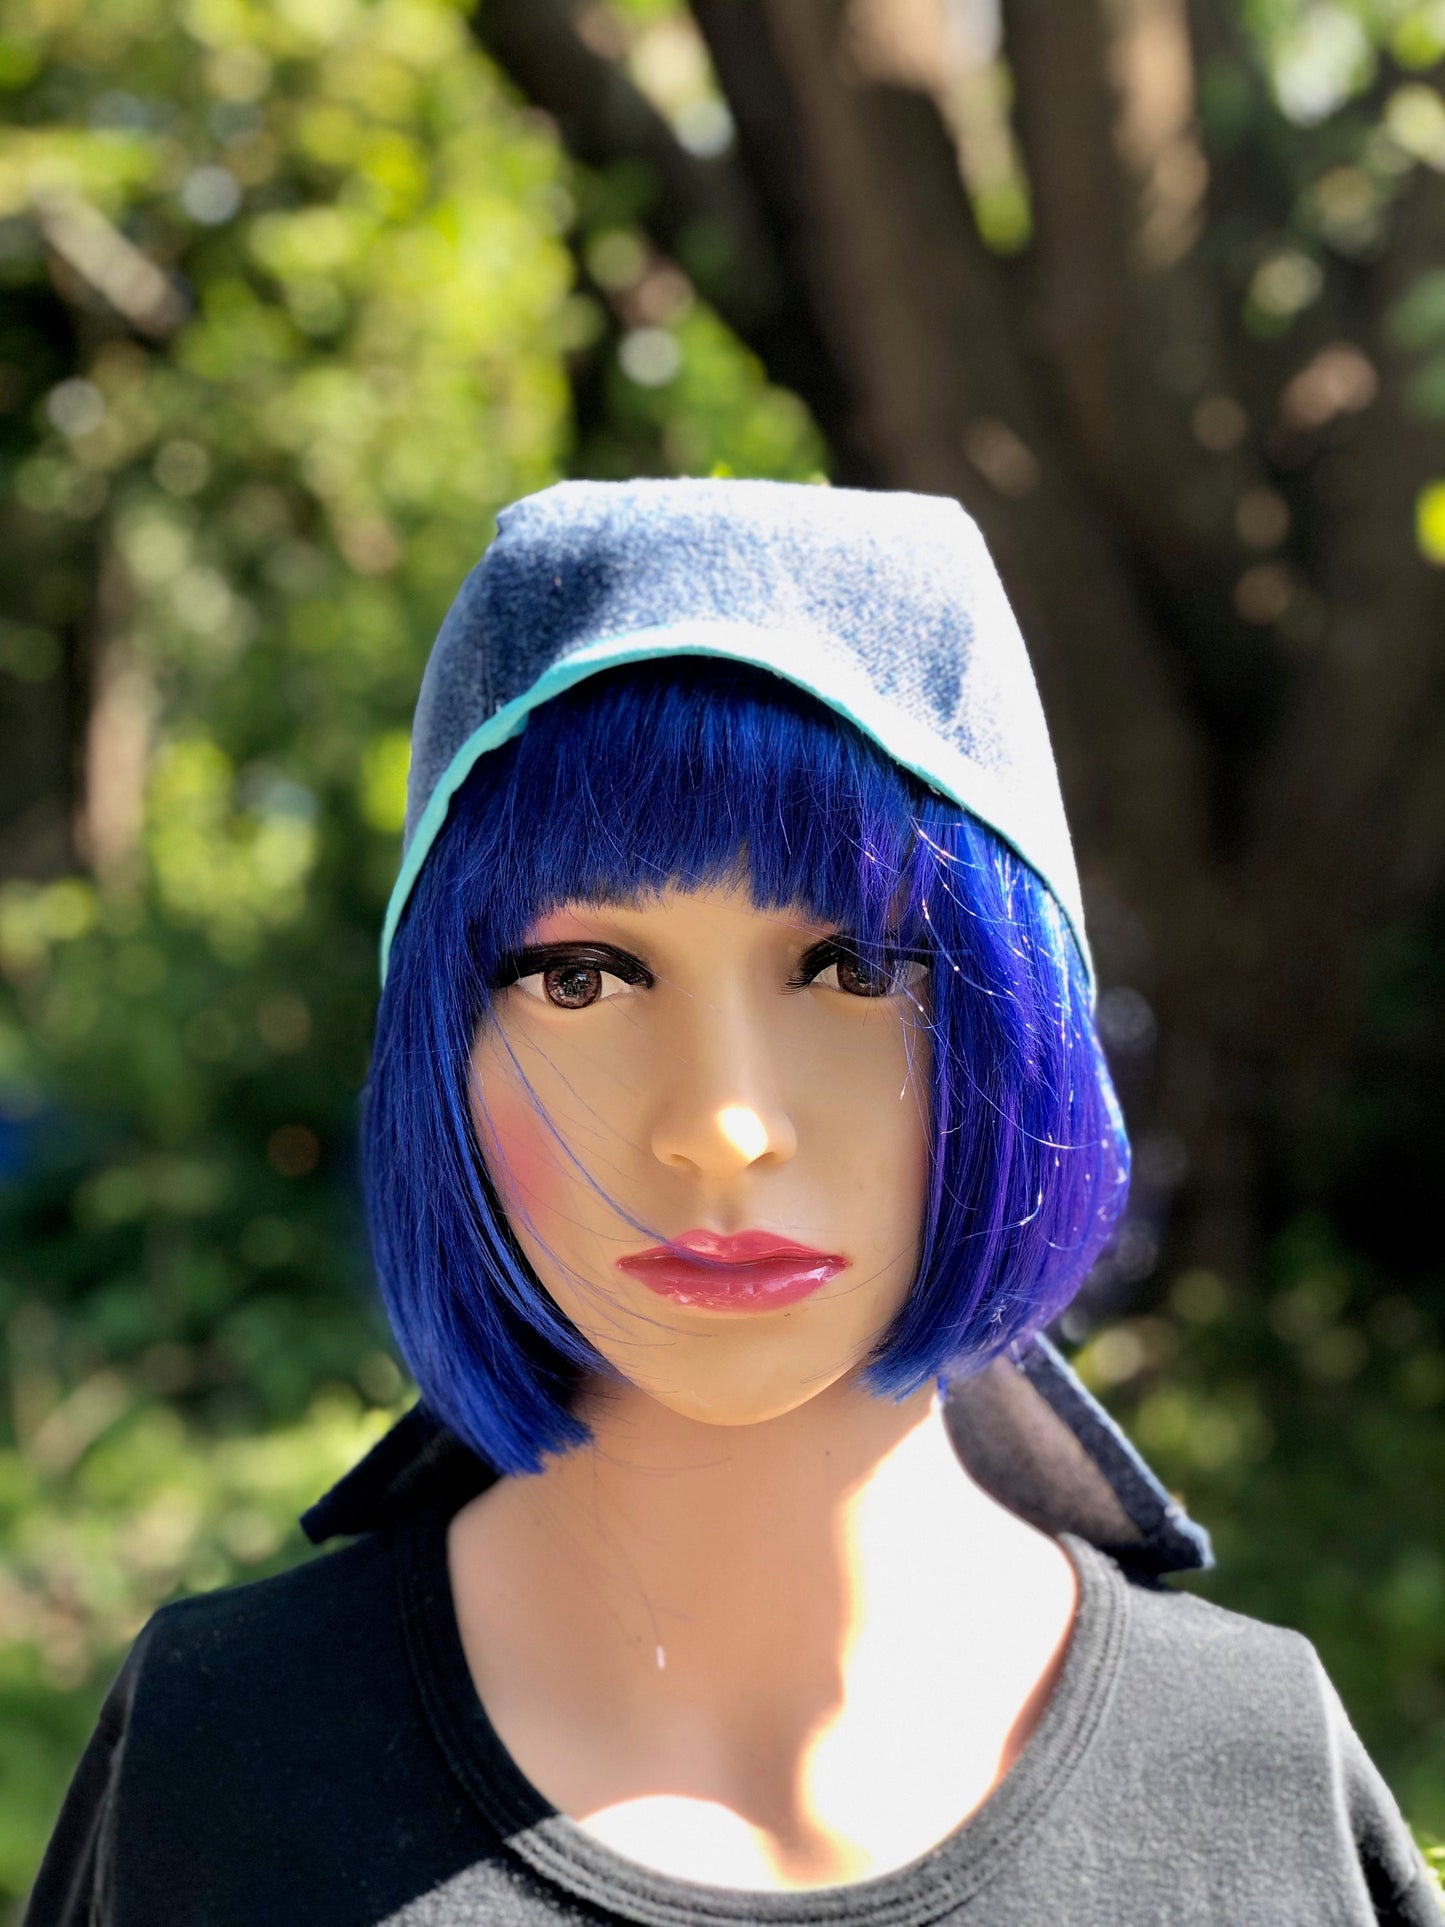 Upcycled Denim Welding Beanie with Neck Cover